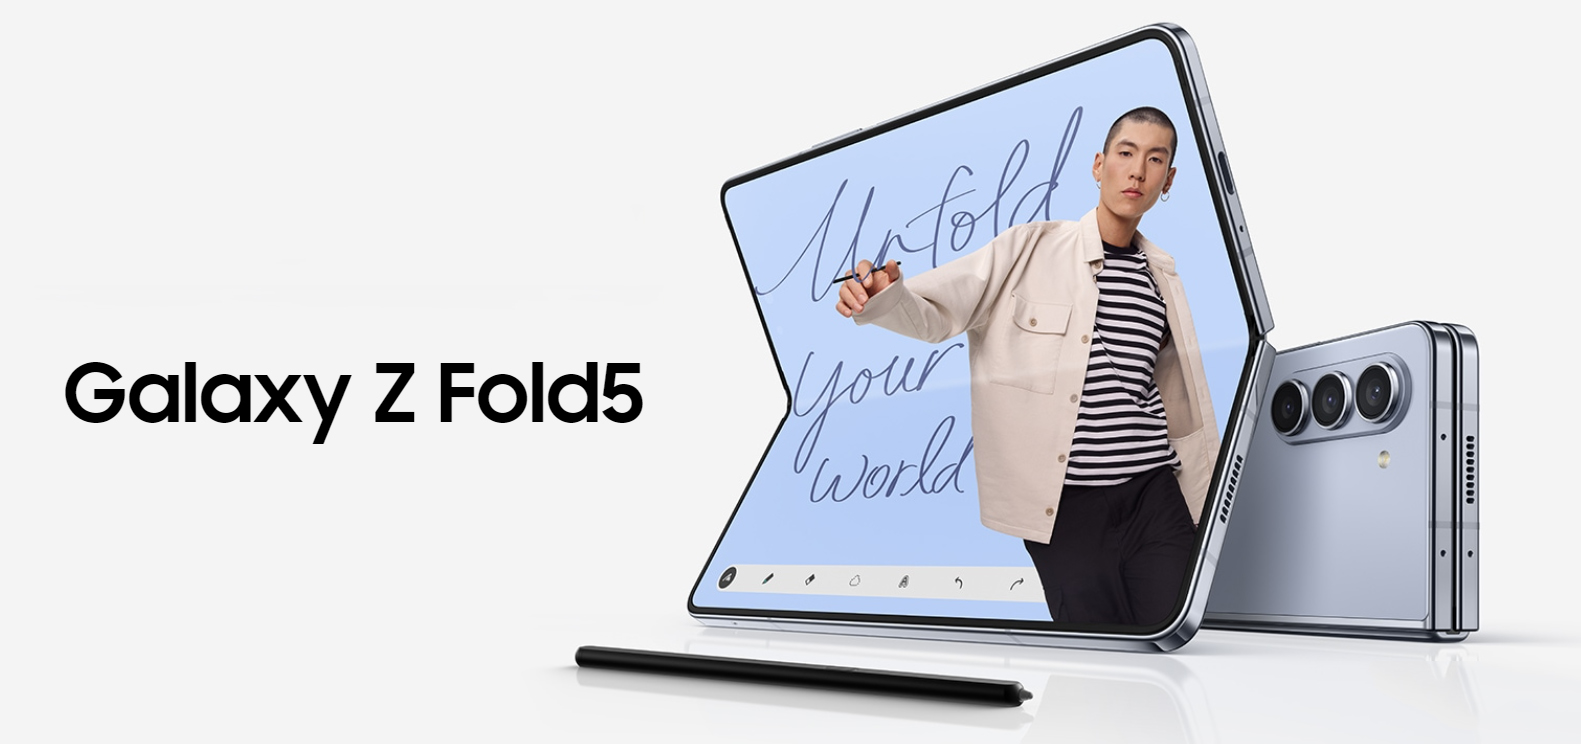 Samsung Galaxy Z Fold5 in Nepal: Yes the foldable now folds completely flat